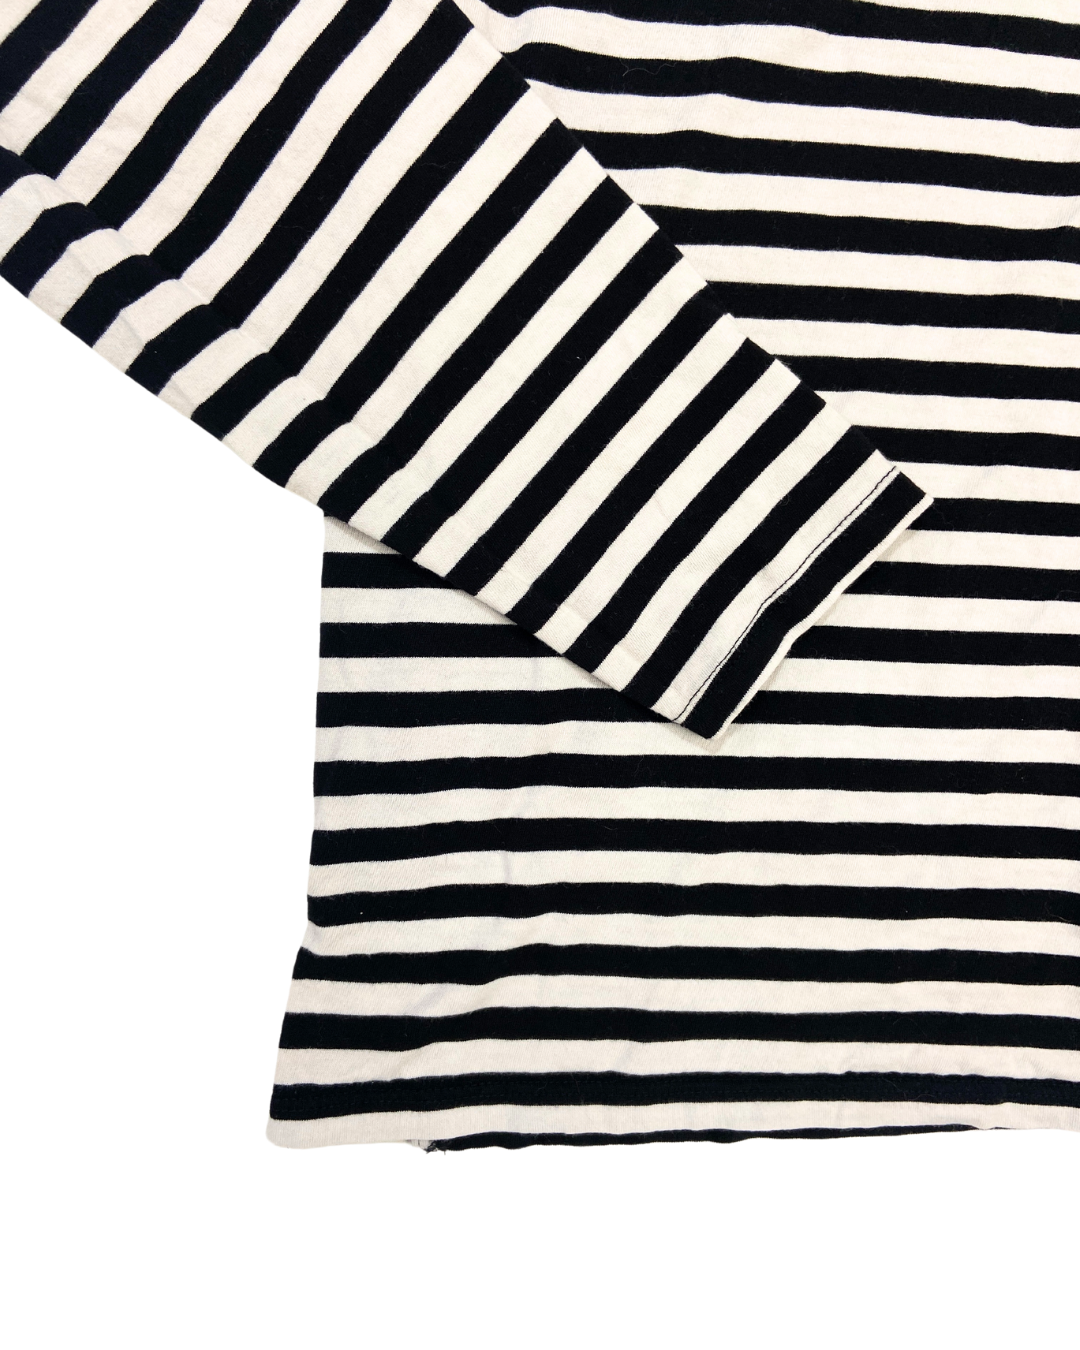 Monki Black and White Striped Long-Sleeve Top